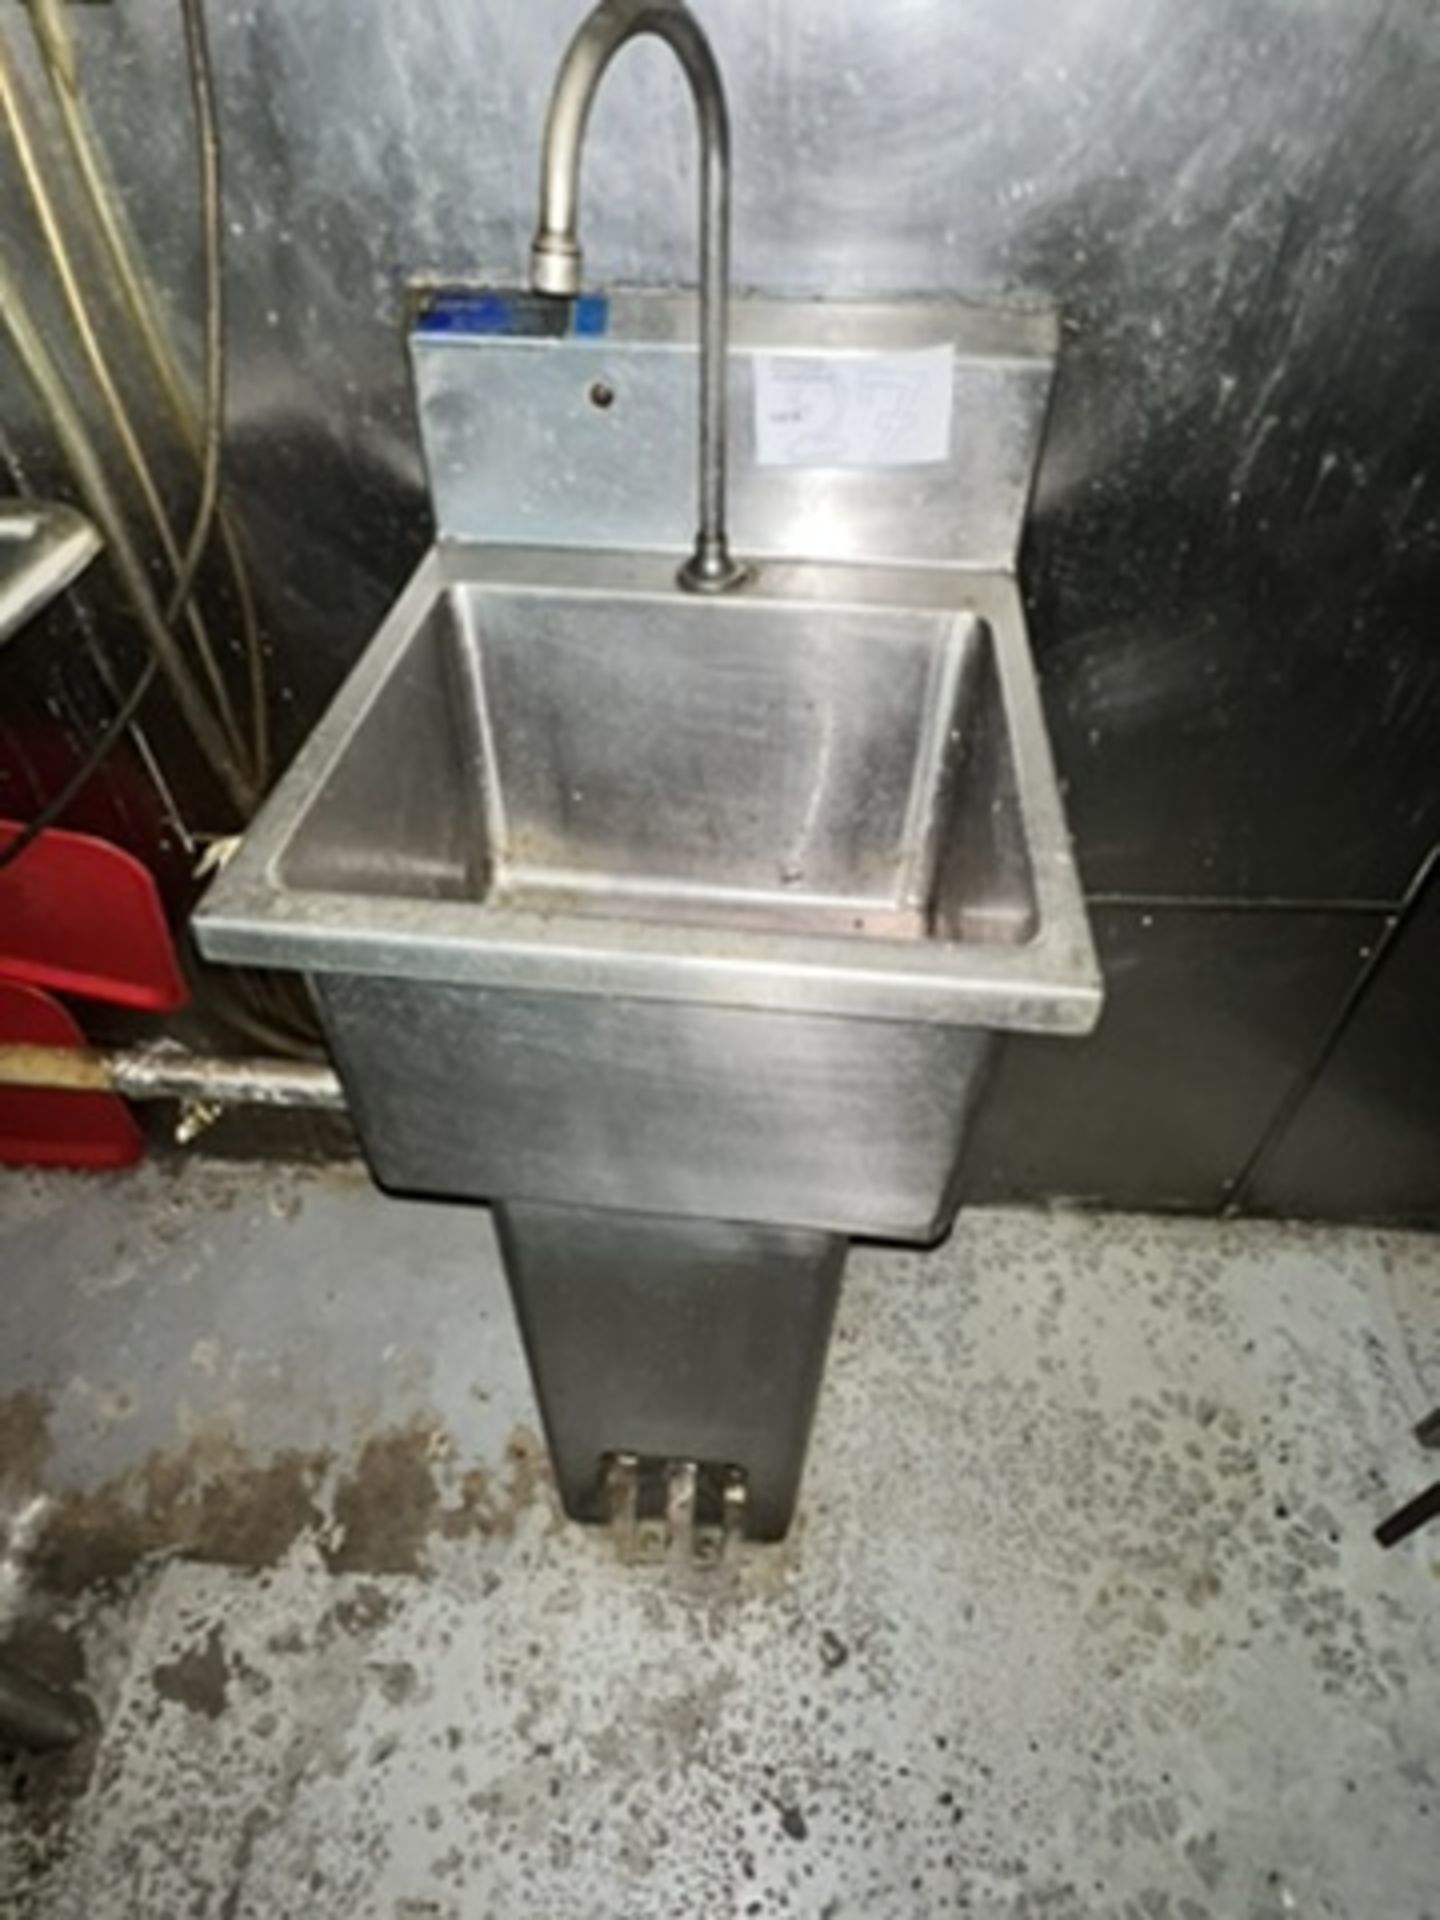 SS' hand wash sink with foot pedals